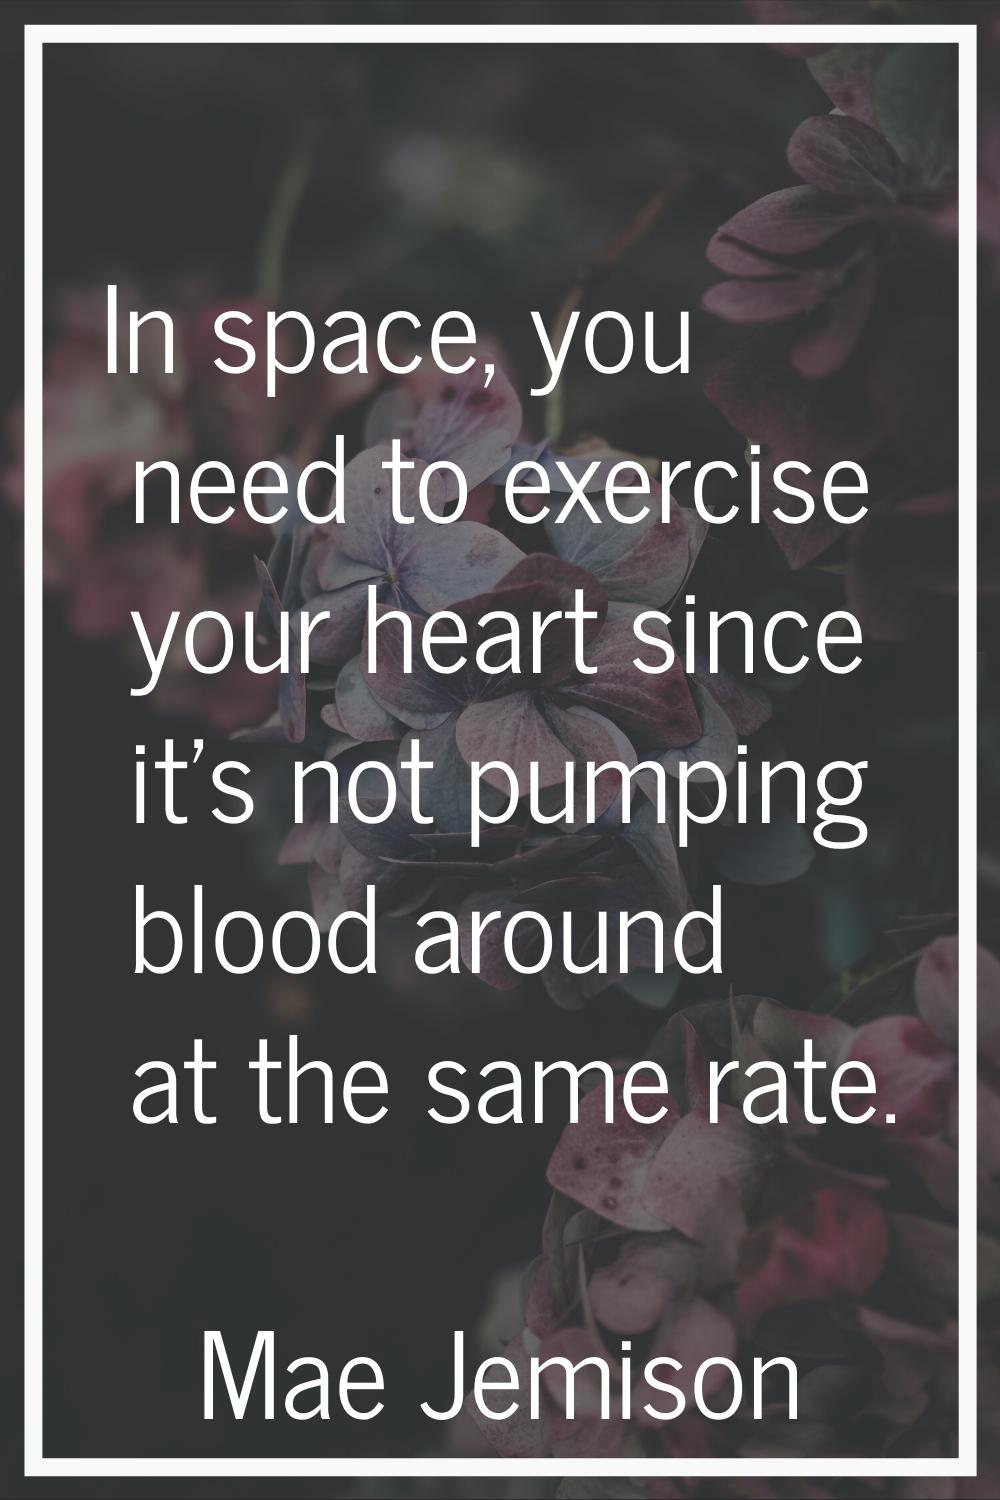 In space, you need to exercise your heart since it's not pumping blood around at the same rate.